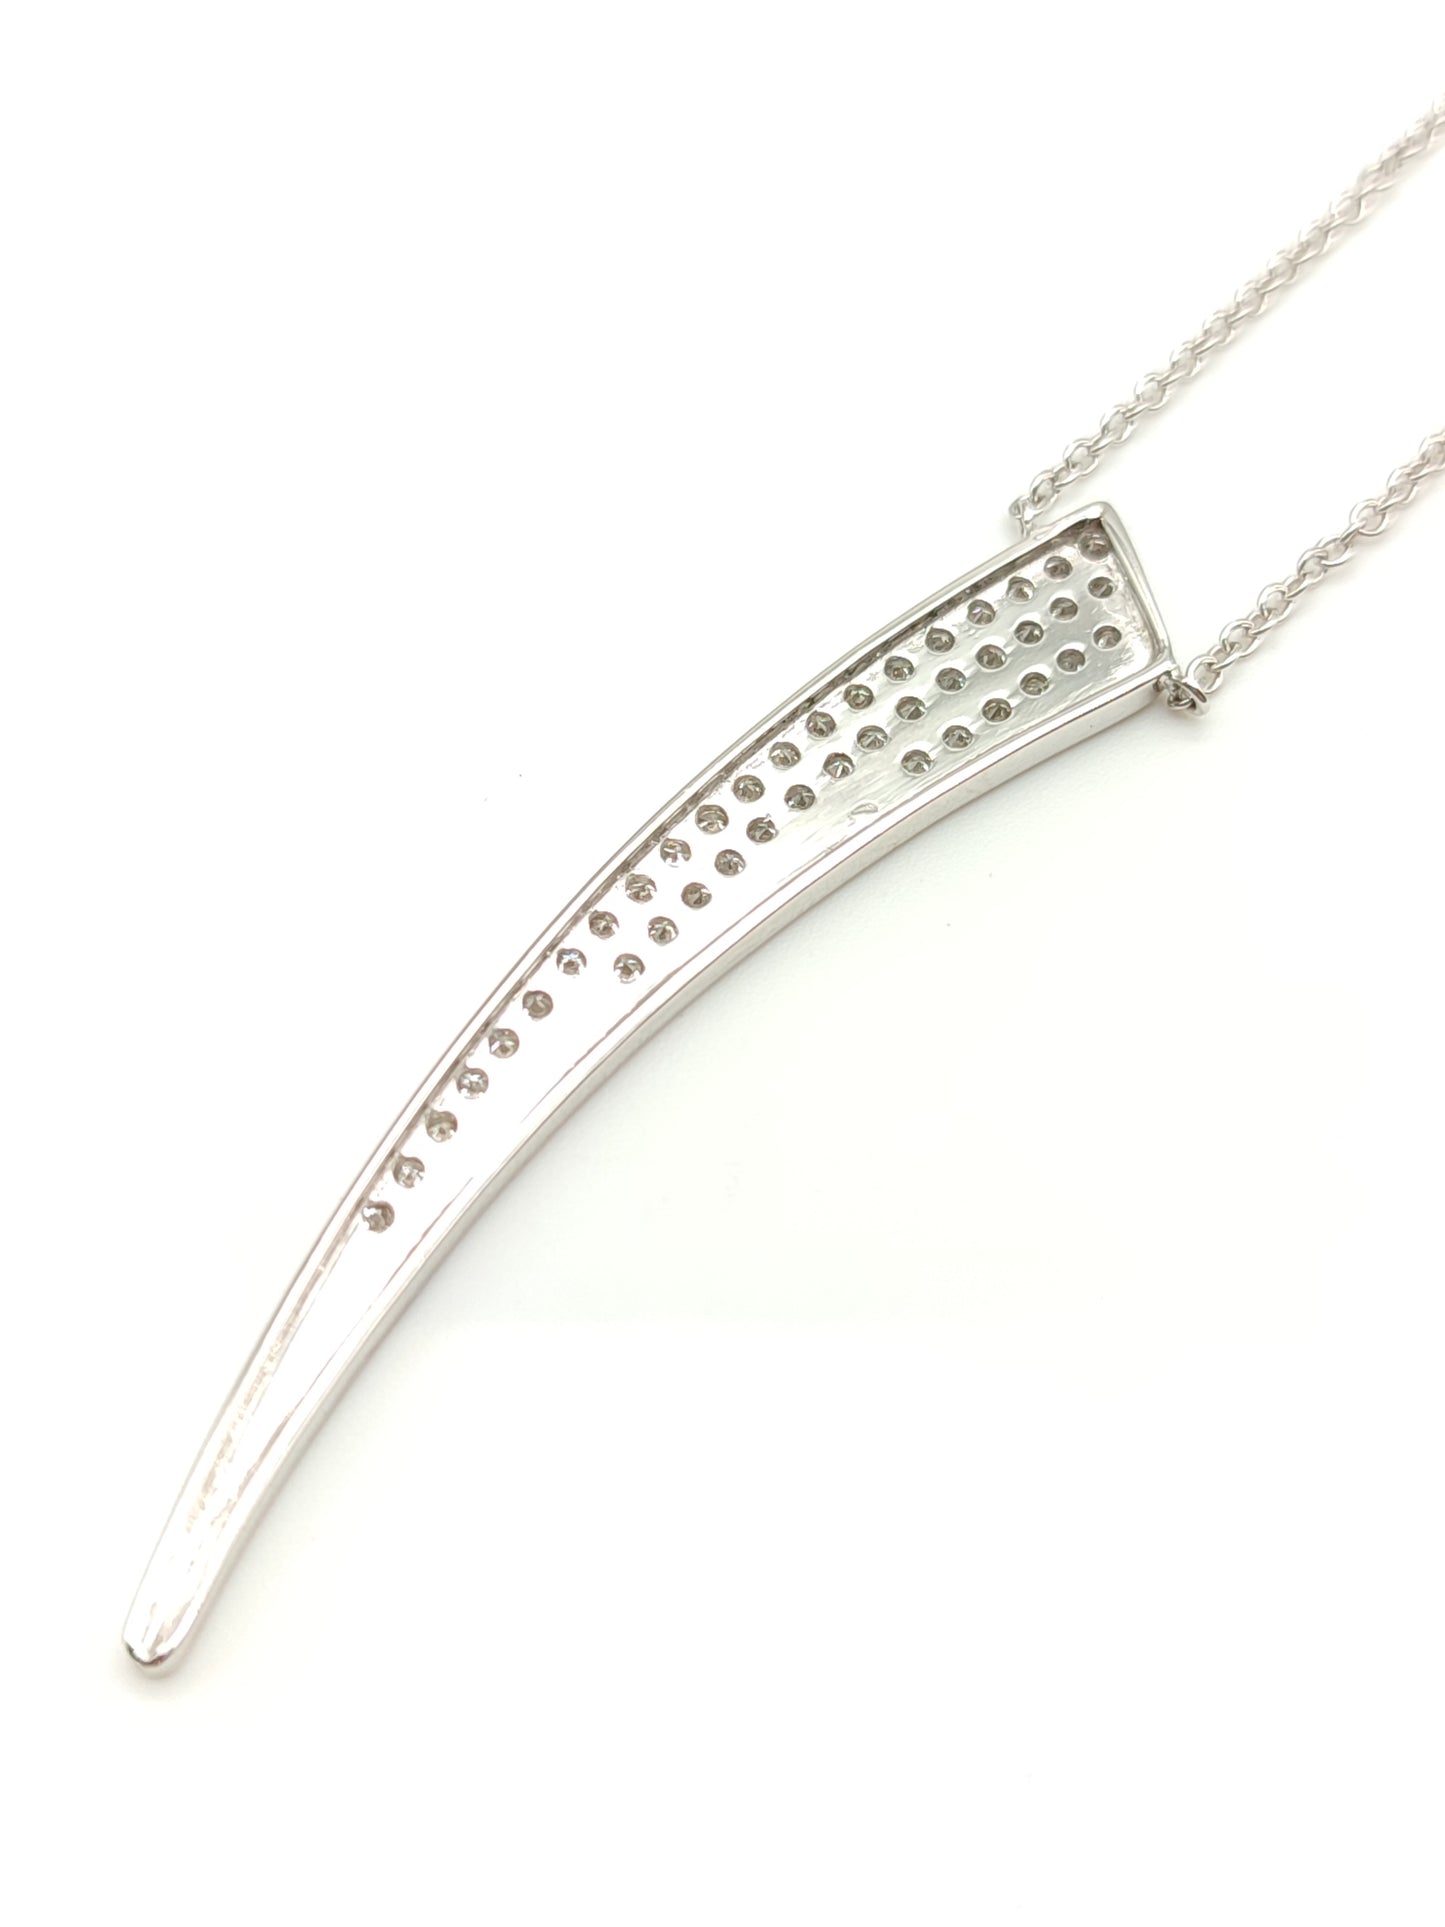 White gold necklace with diamonds